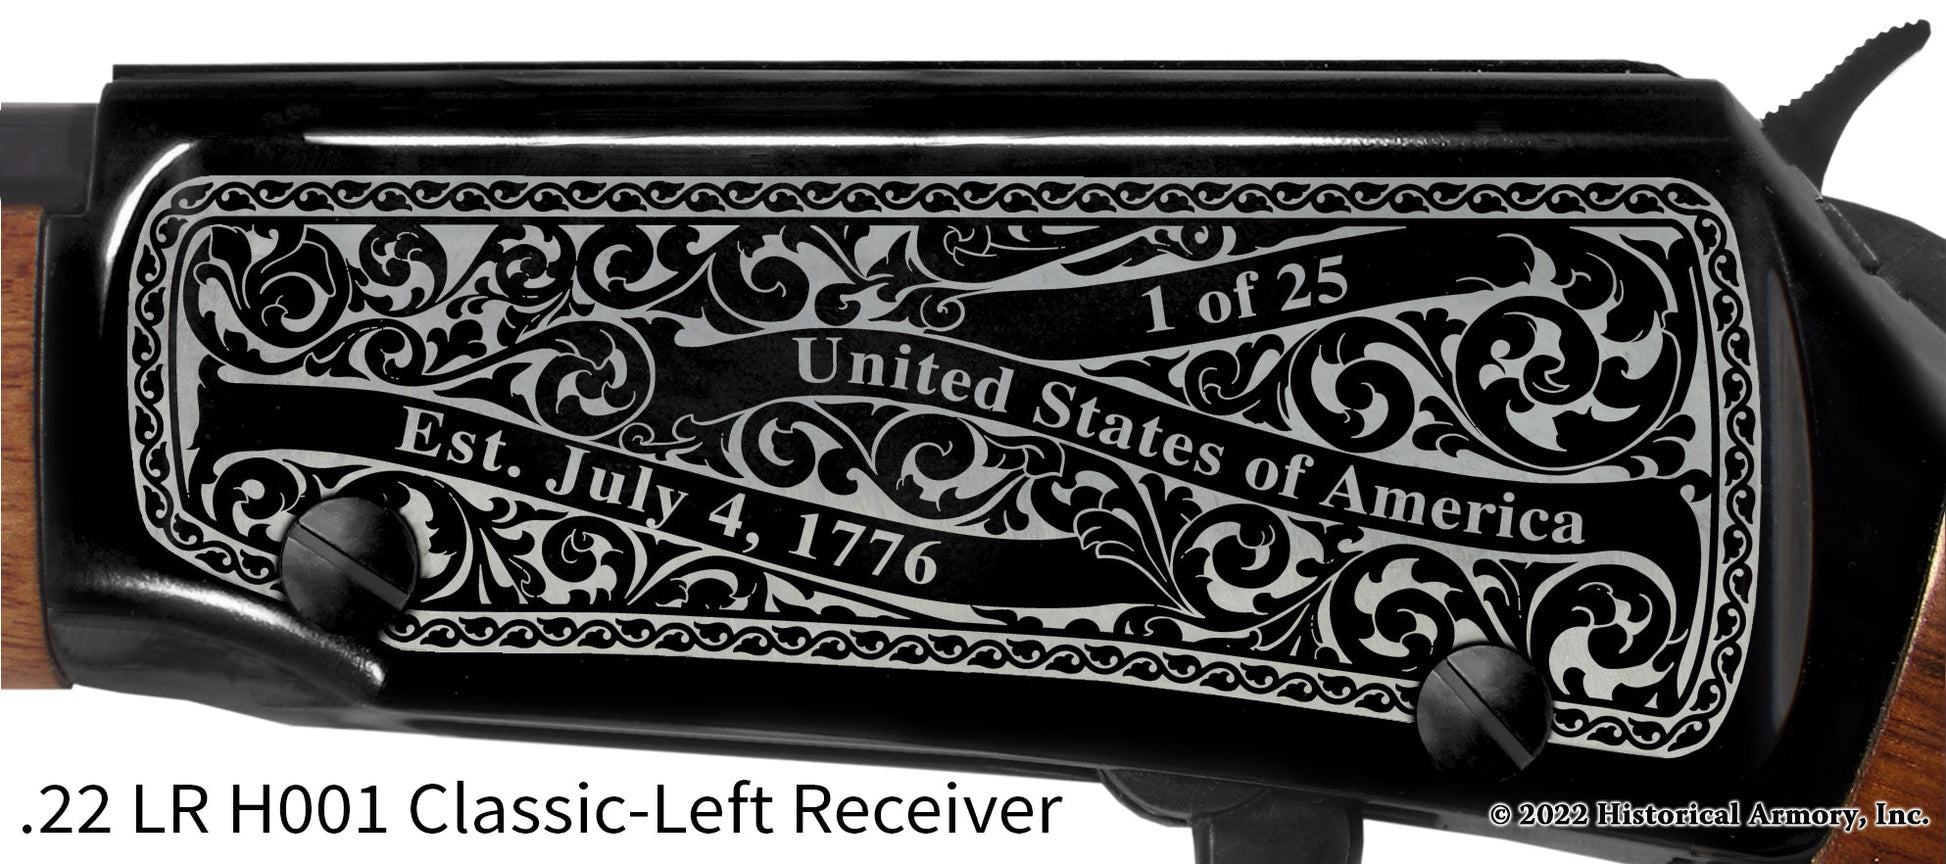 Ritchie County West Virginia Engraved Henry H001 Rifle